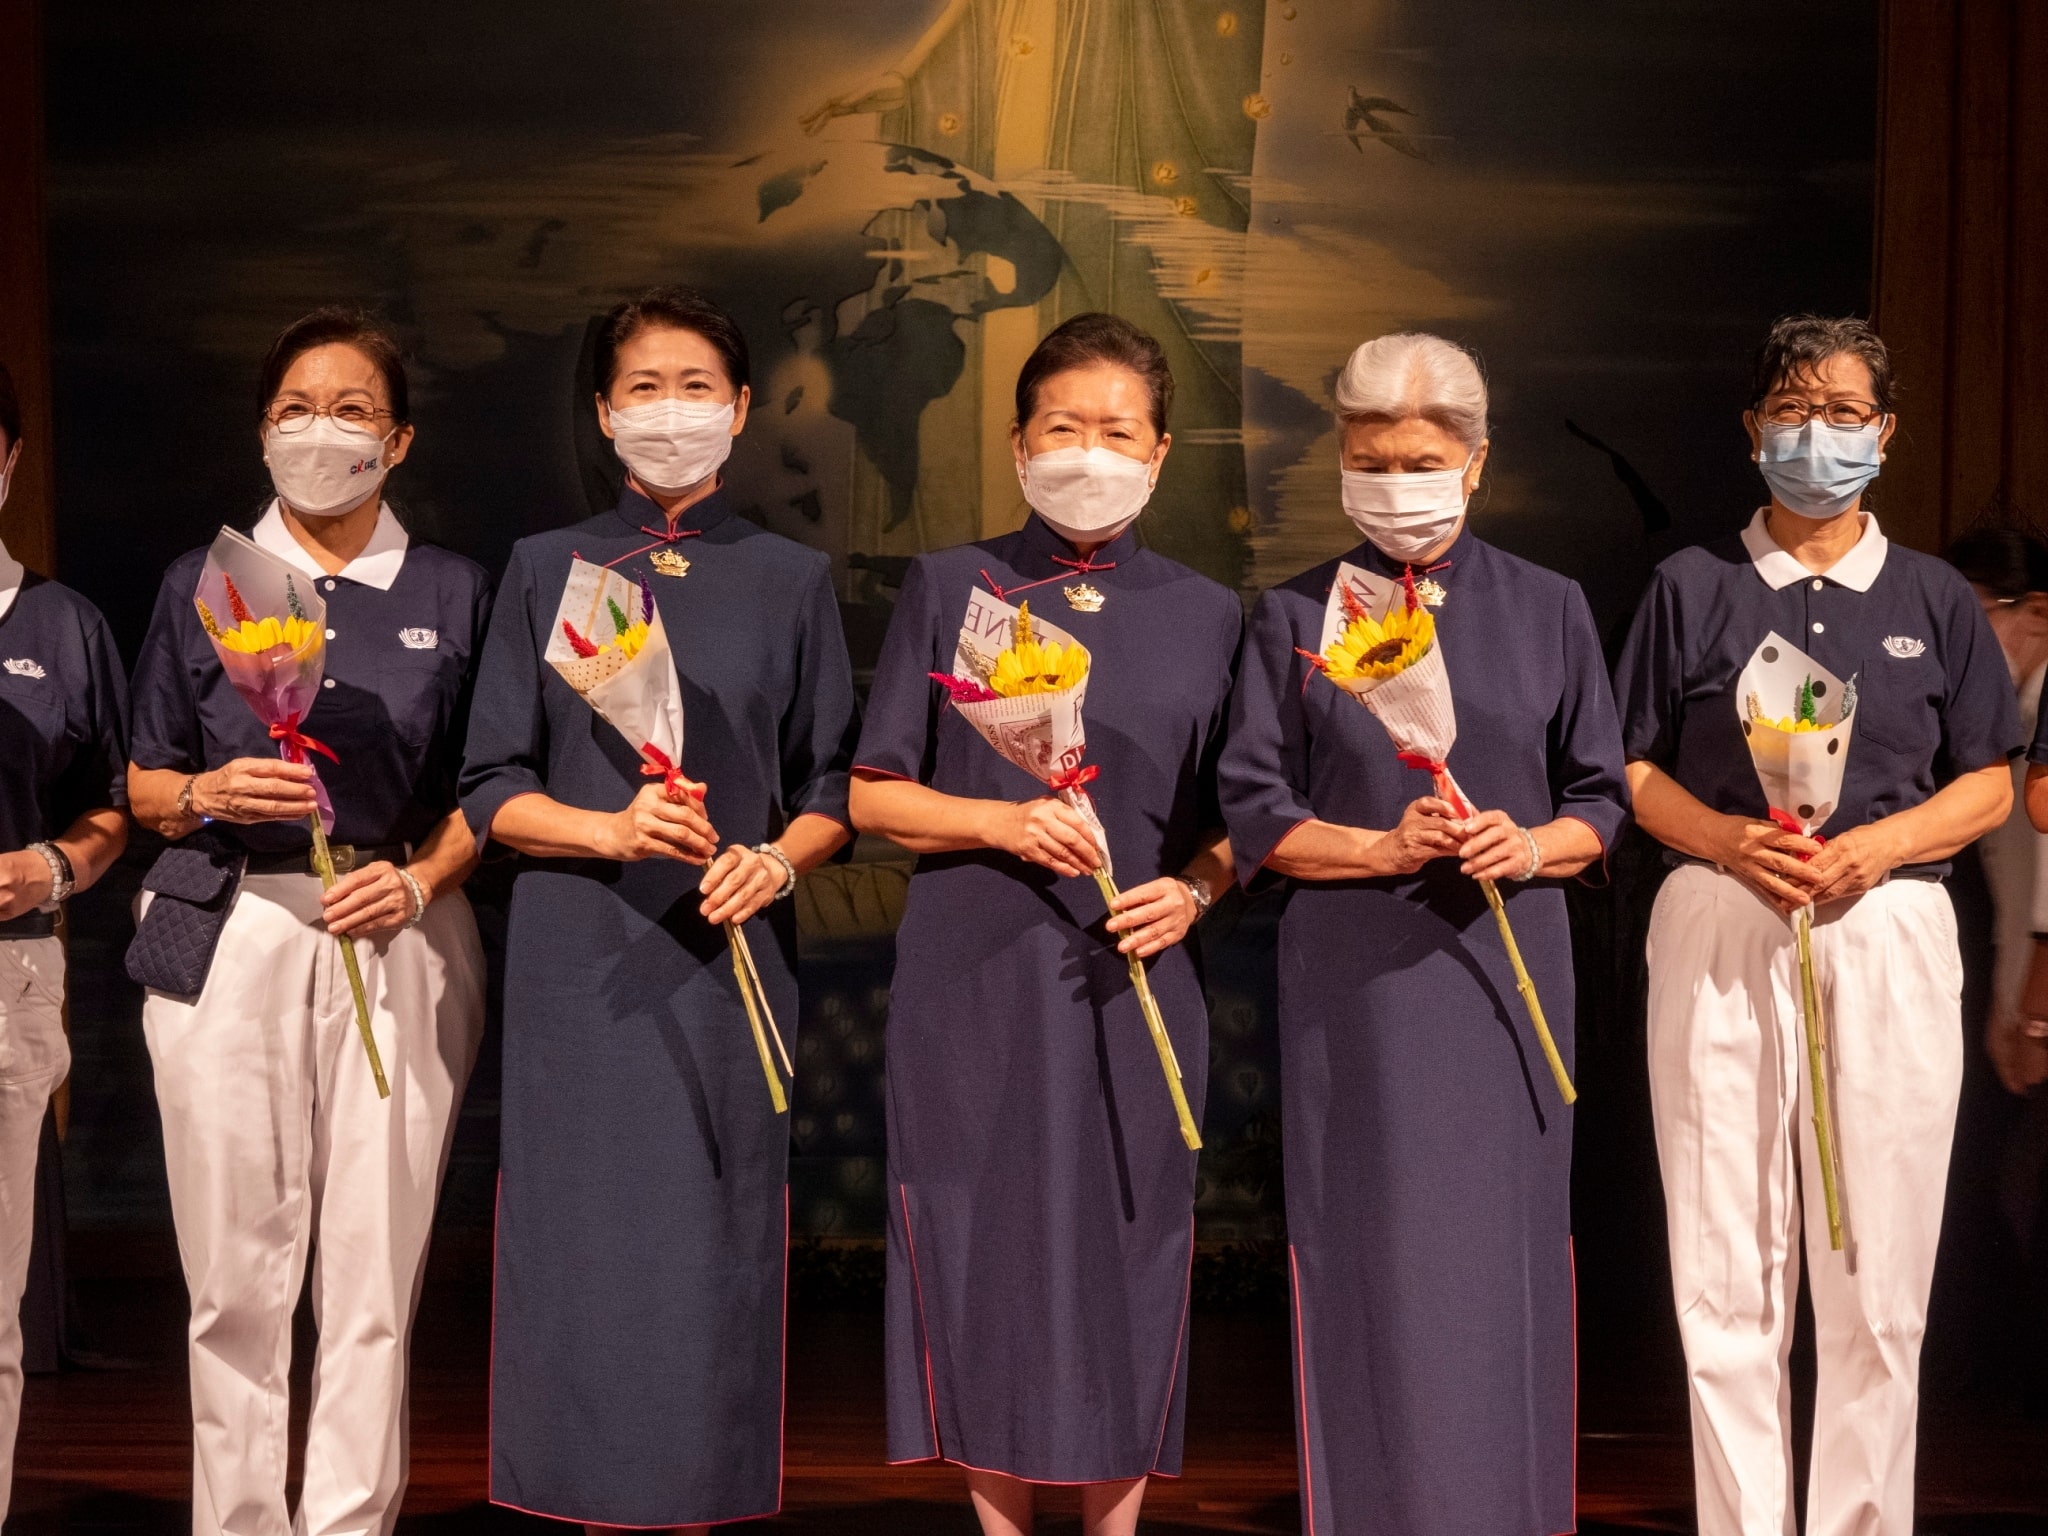 Tzu Chi volunteers pose for a photo after receiving the flowers. 【Photo by Matt Serrano】